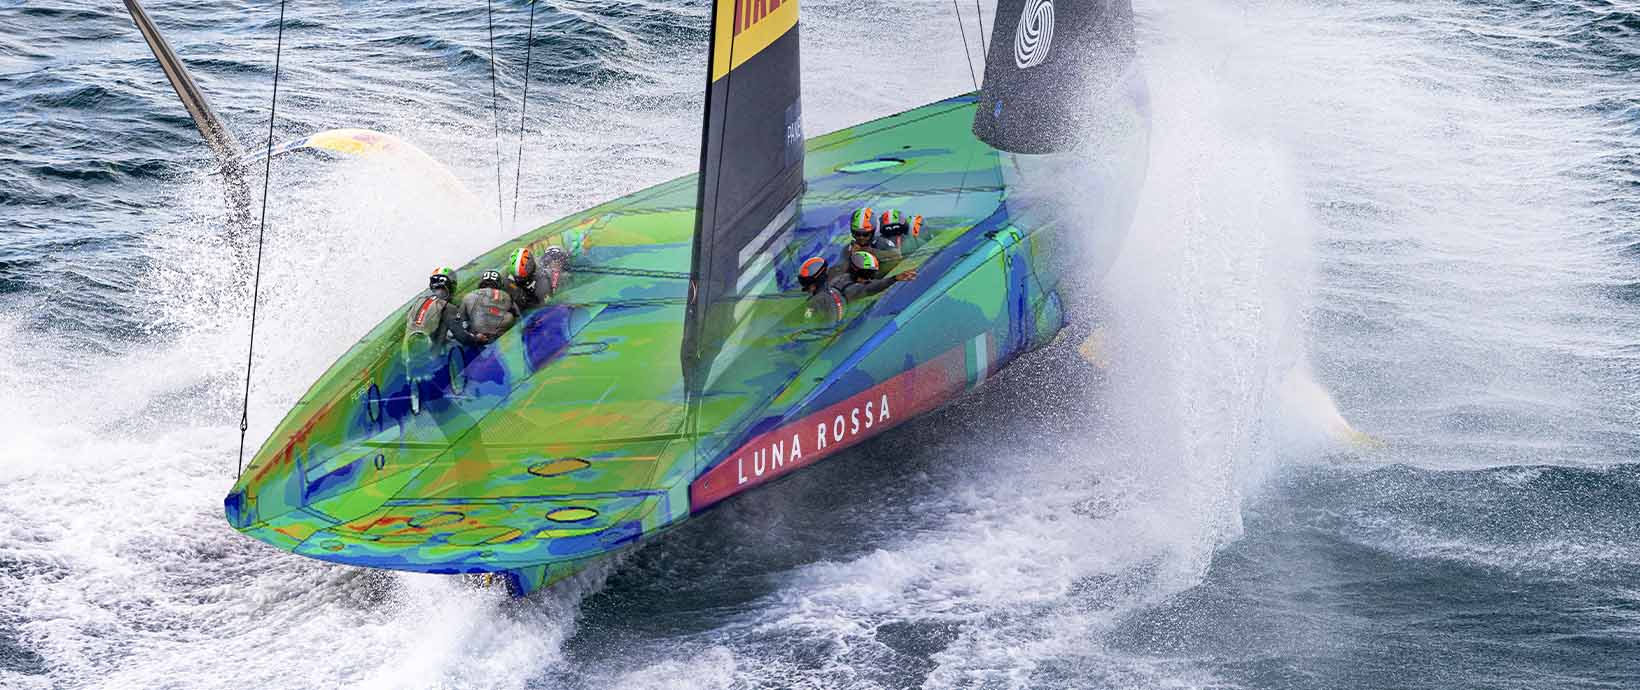 The Winning Edge: How Cutting-Edge Technologies like Digital Twins are the Key to Success in the America’s Cup